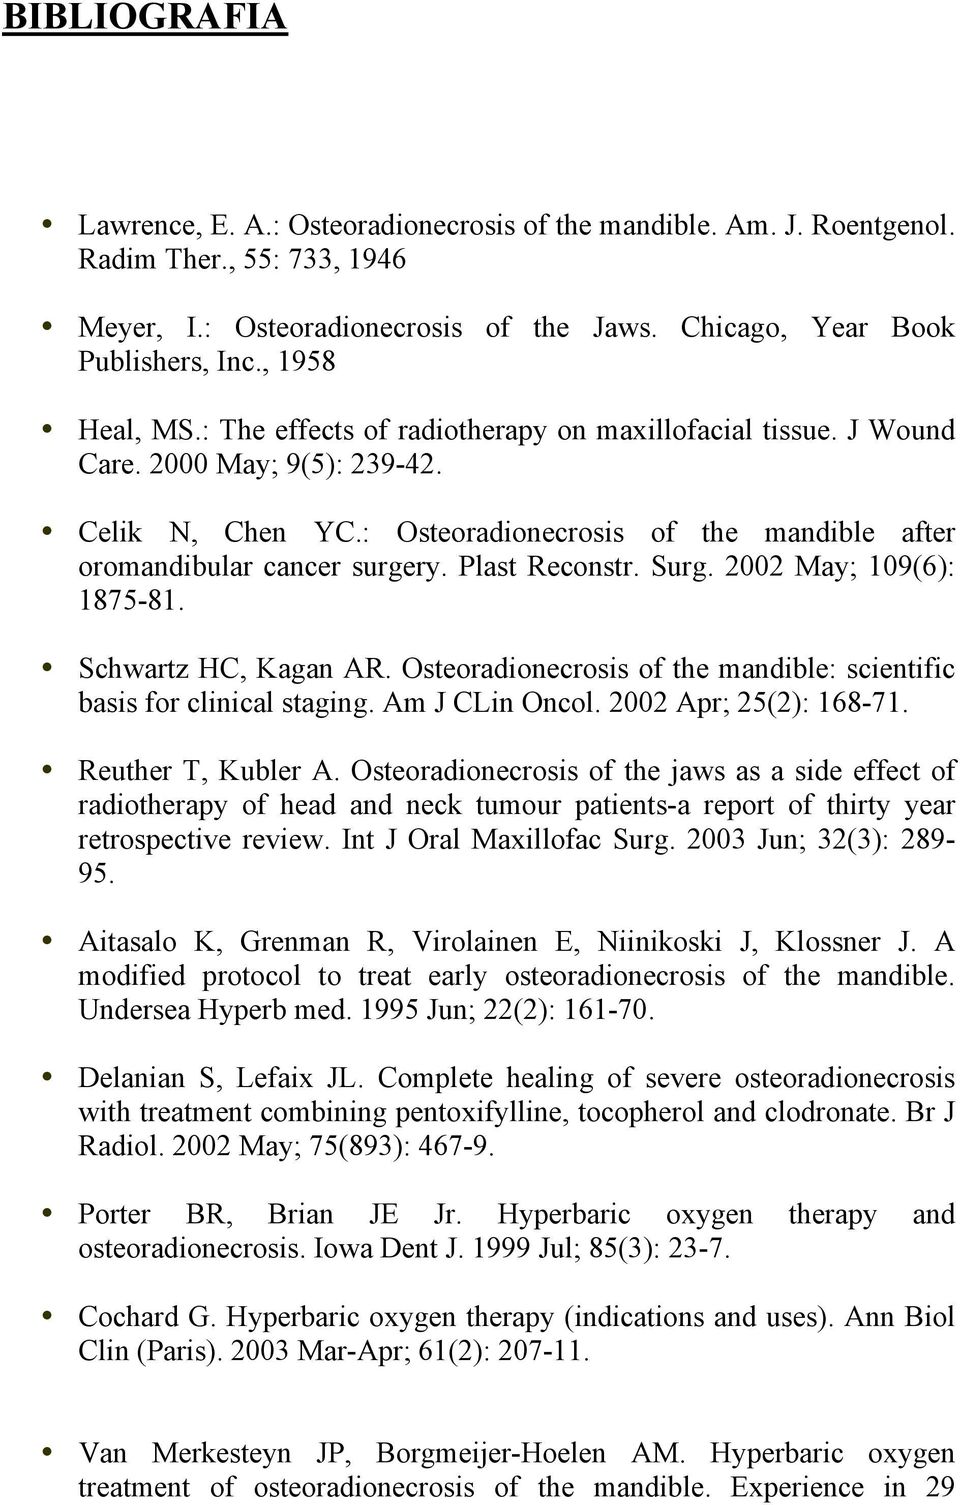 Plast Reconstr. Surg. 2002 May; 109(6): 1875-81. Schwartz HC, Kagan AR. Osteoradionecrosis of the mandible: scientific basis for clinical staging. Am J CLin Oncol. 2002 Apr; 25(2): 168-71.